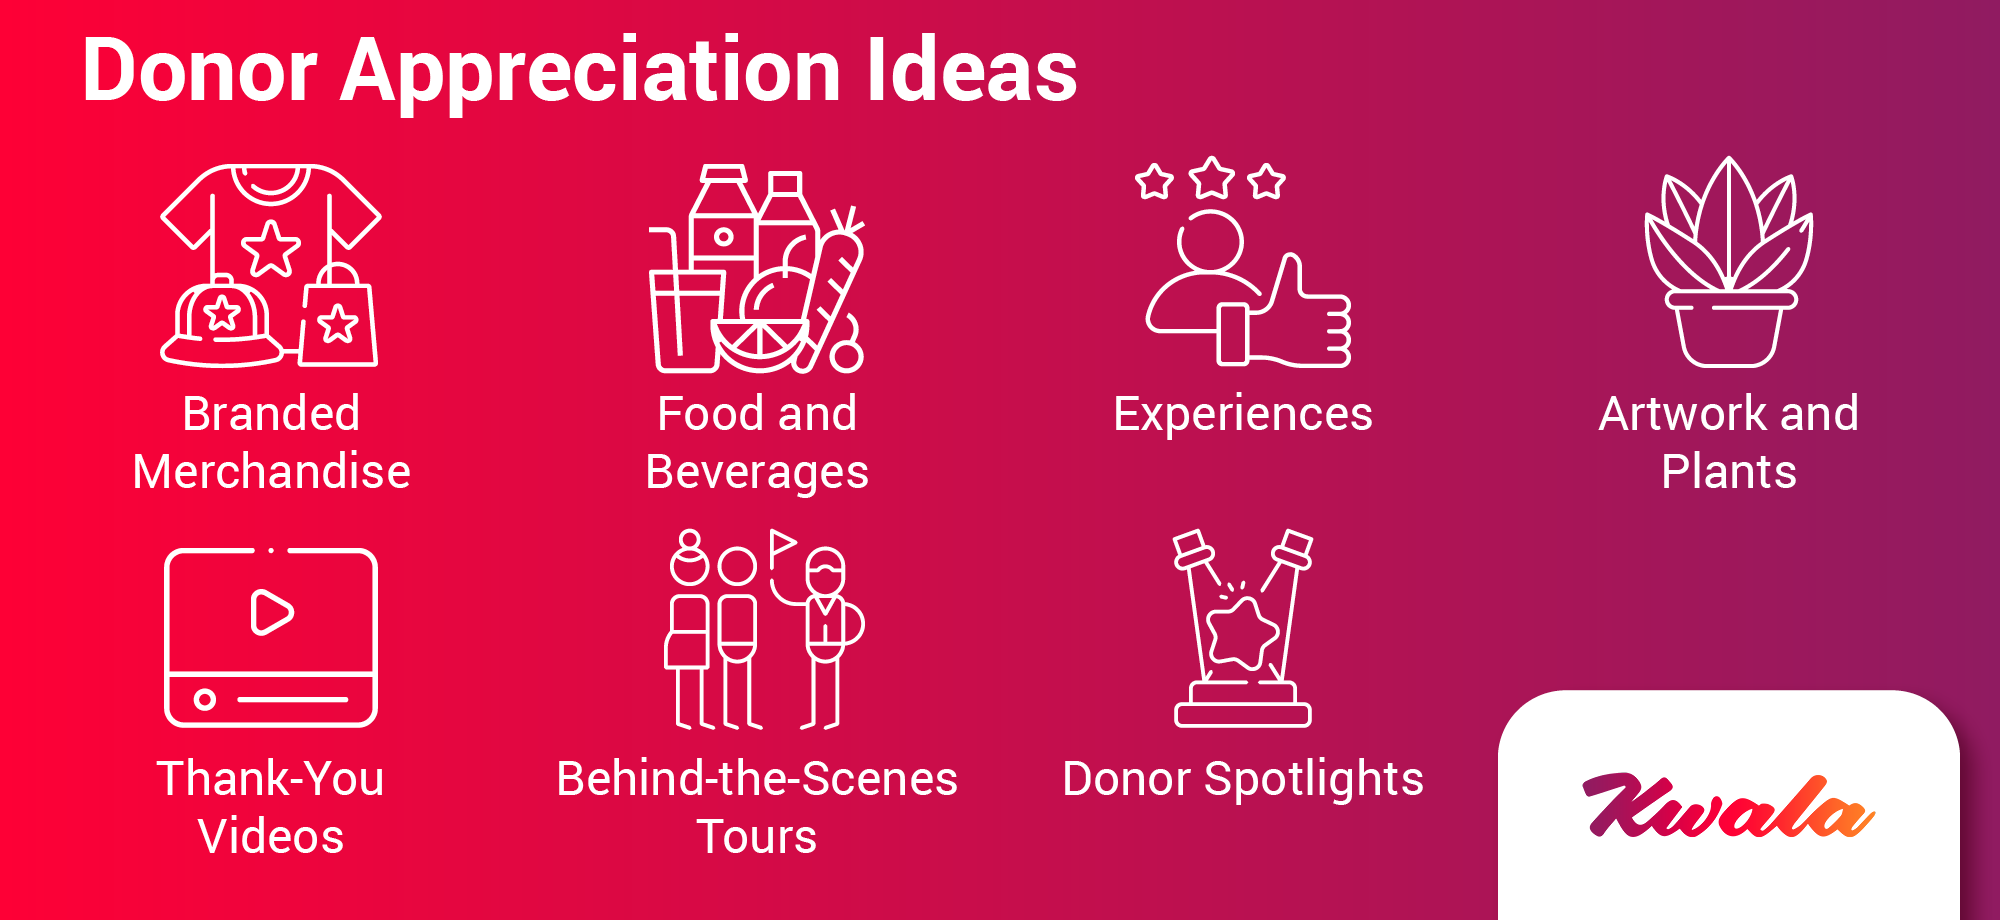 Explore the following donor appreciation ideas, listed below. 